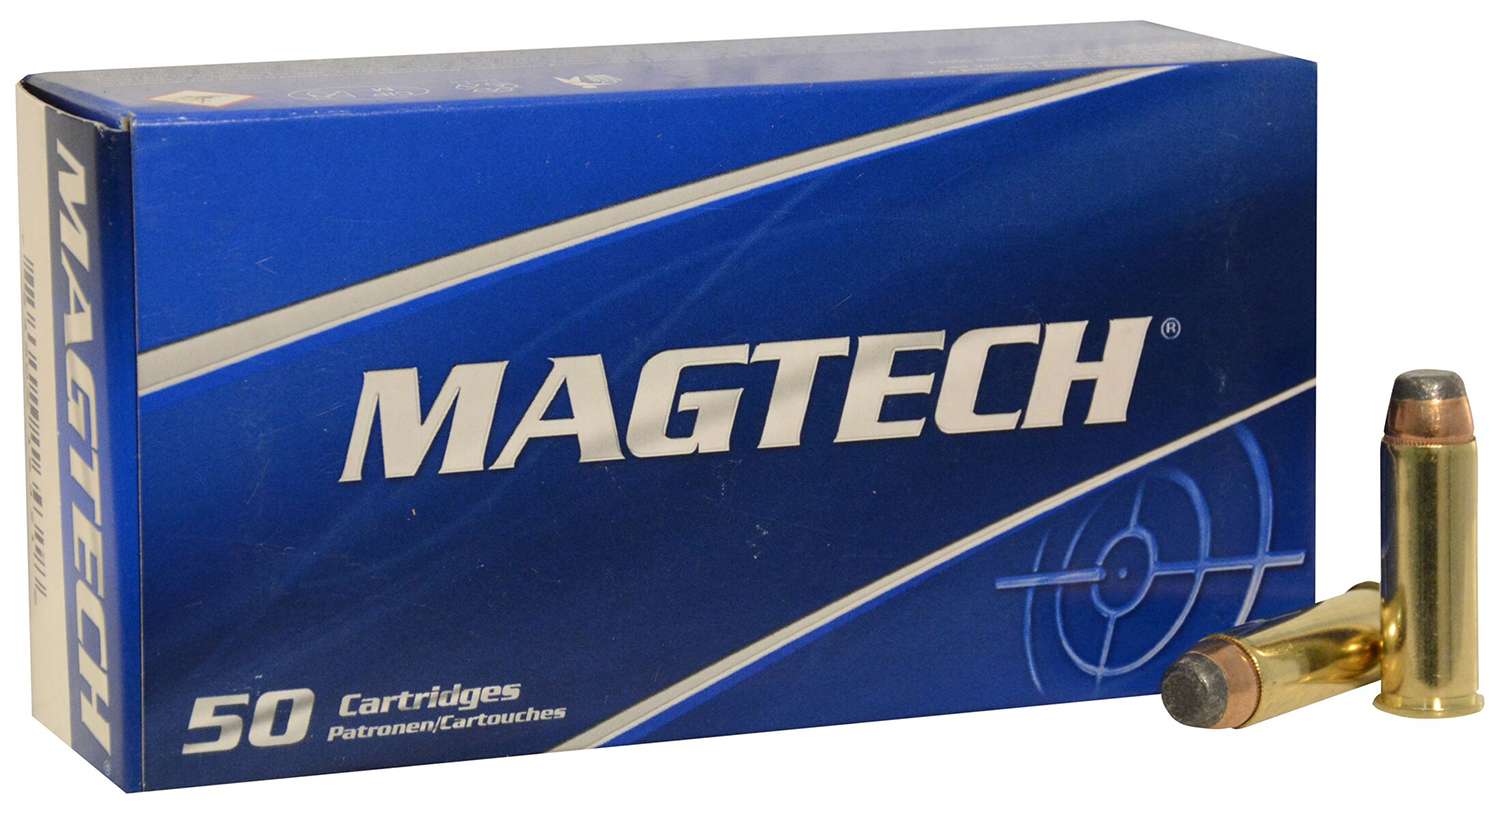 Magtech 44A Range/Training 44 Rem Mag 240 gr Semi Jacketed Soft Point ...